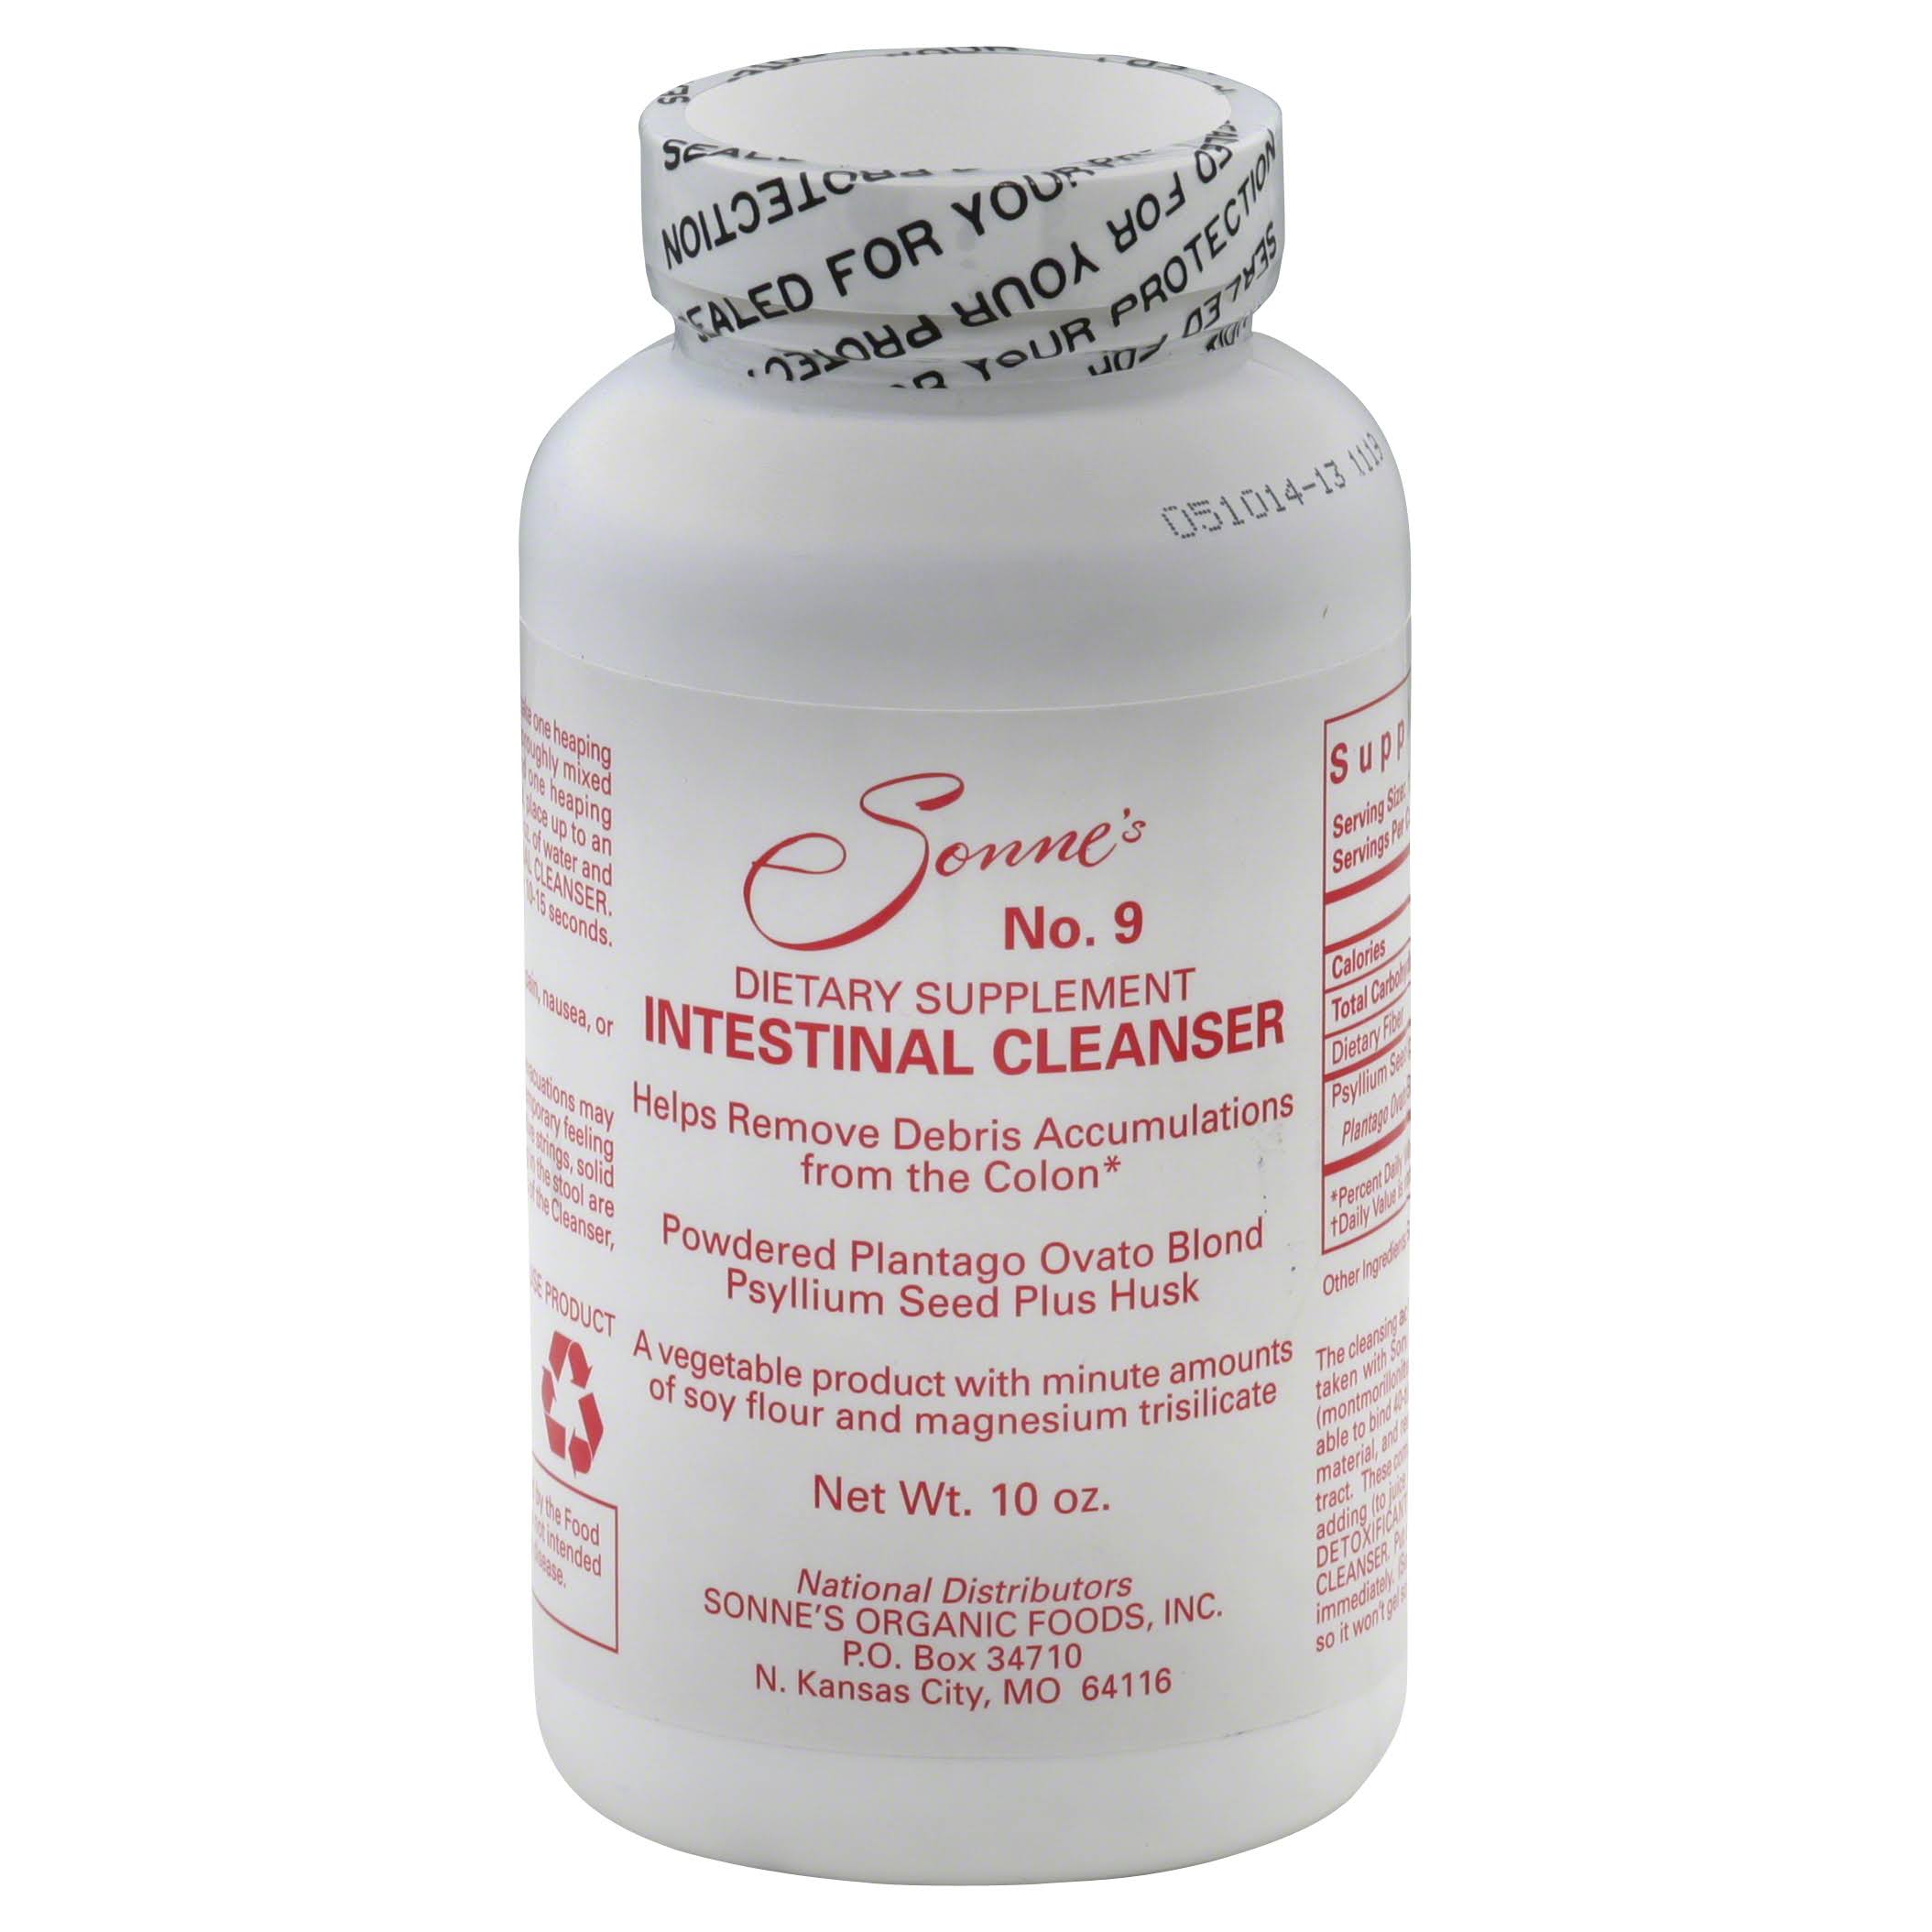 Sonnes Products Intestinal Cleanser #9 - 10oz